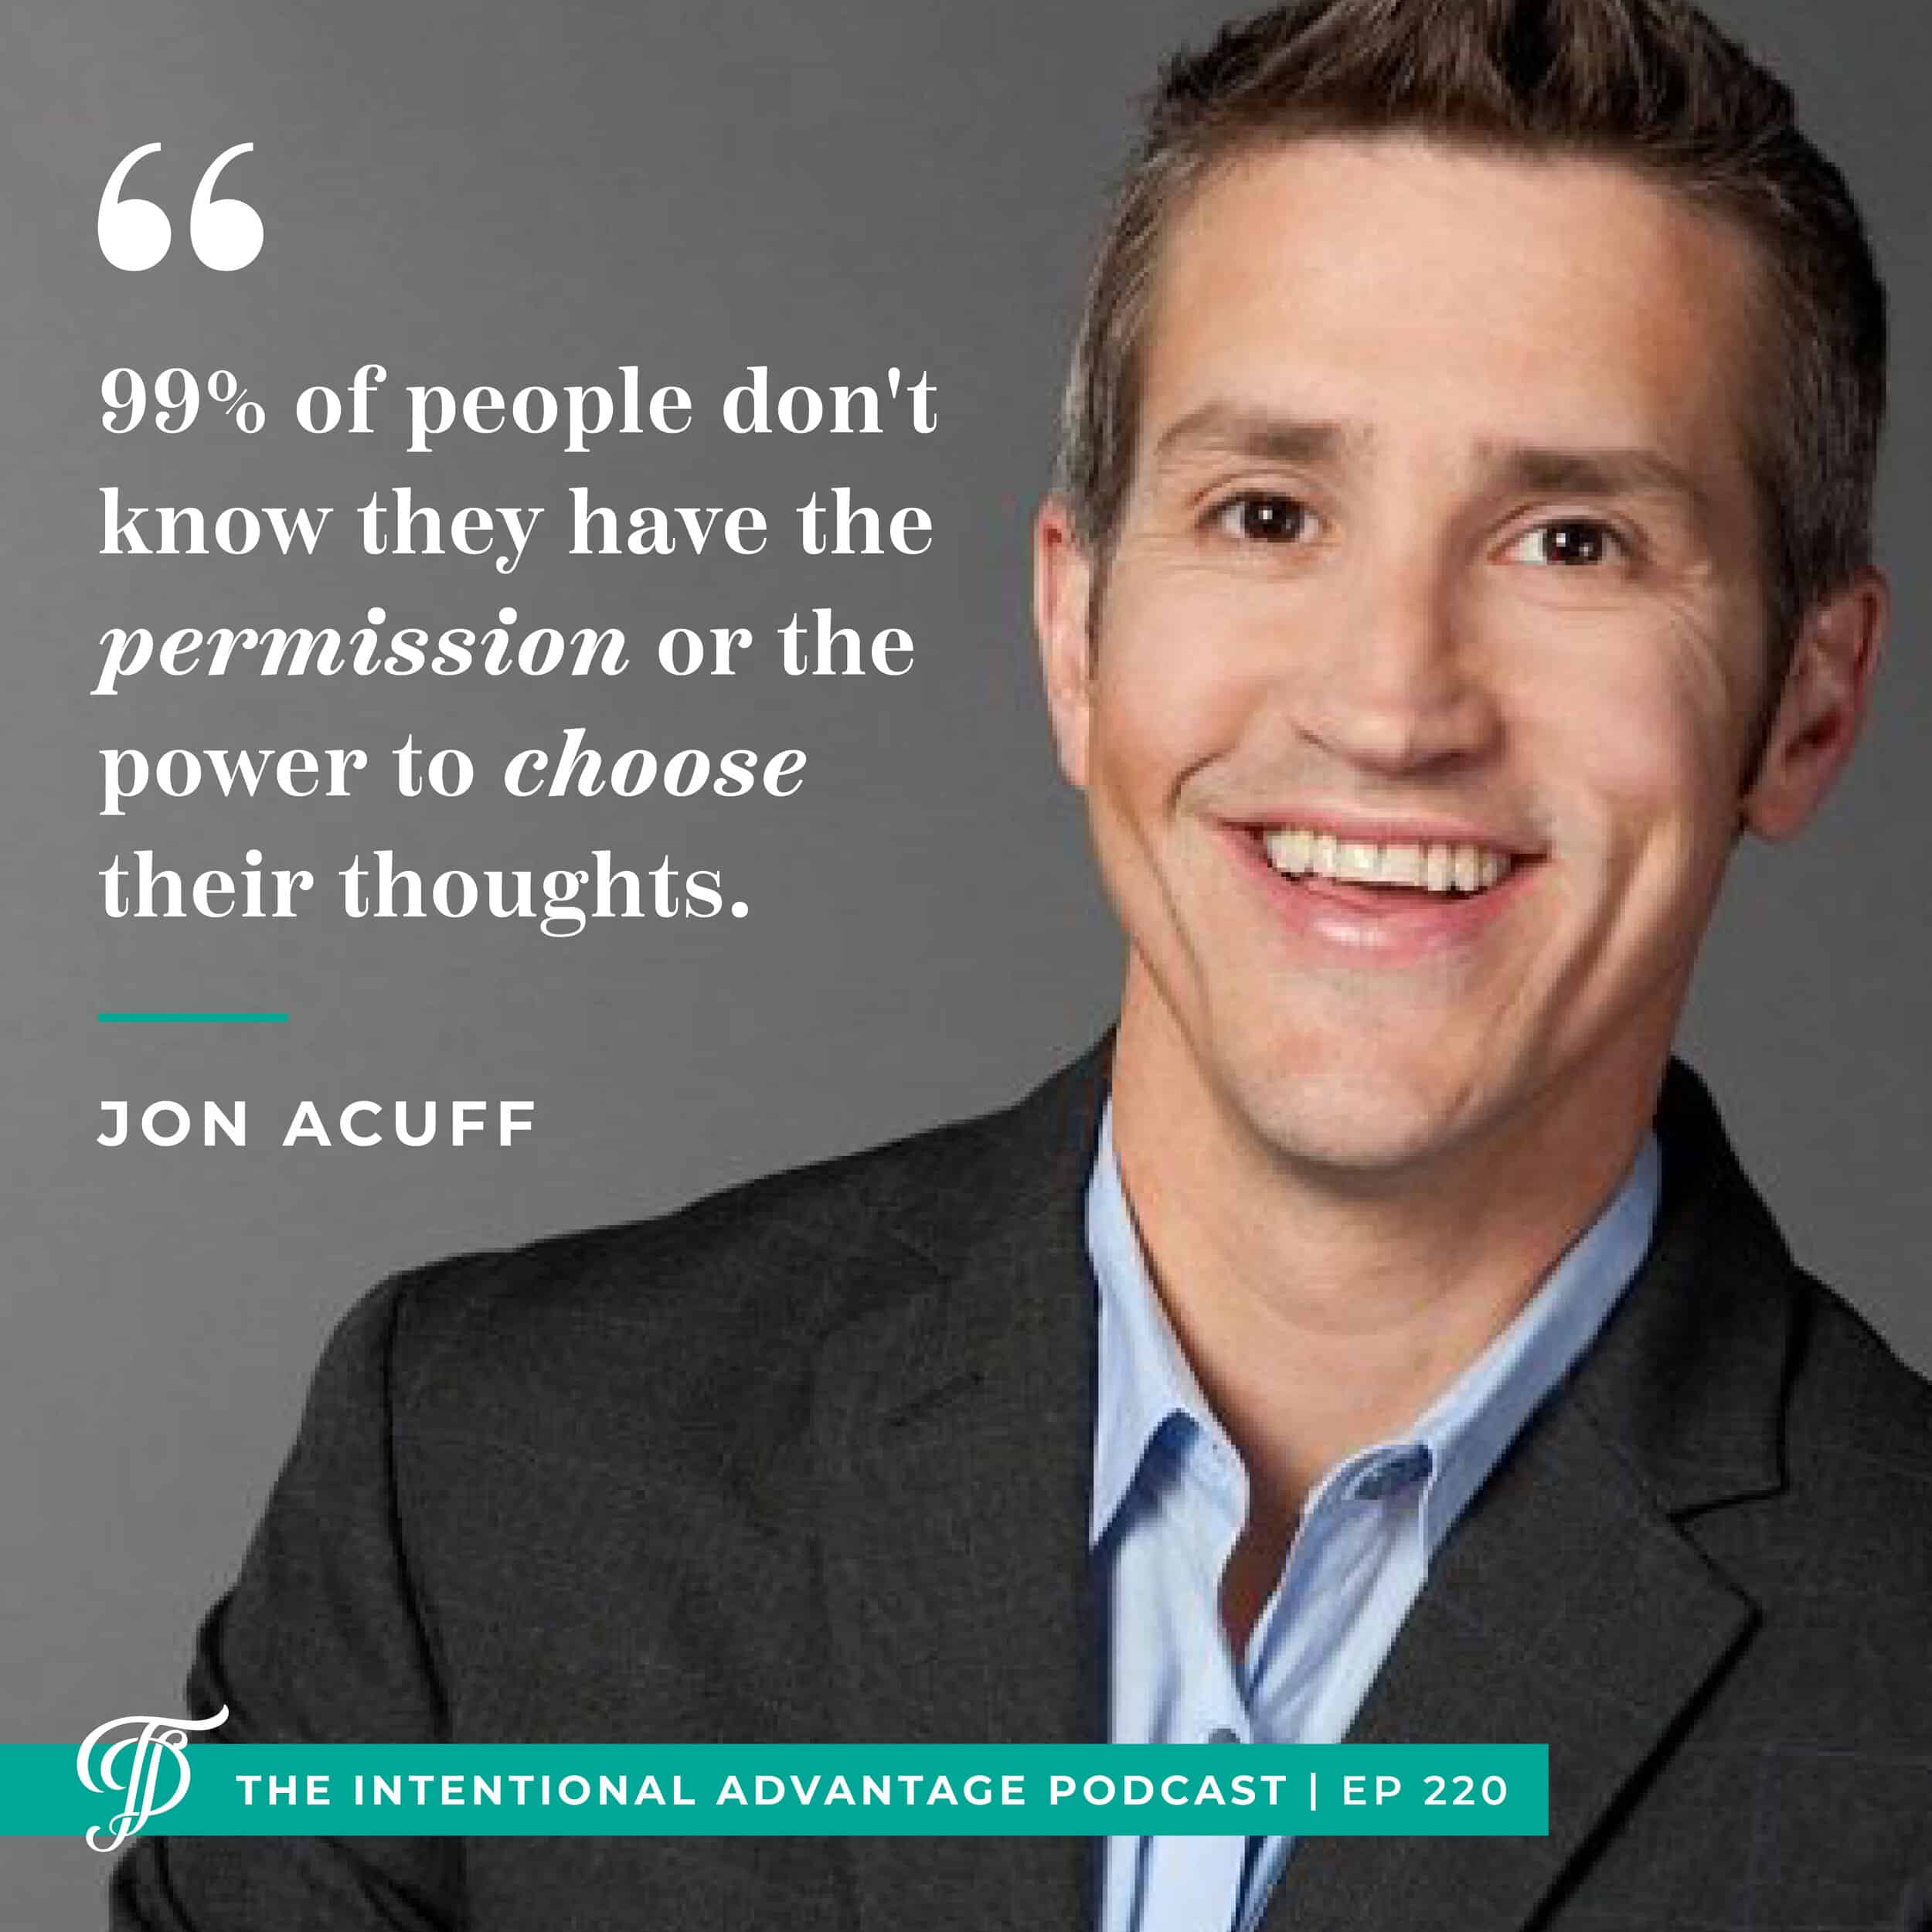 Jon Acuff podcast interview on The Intentional Advantage